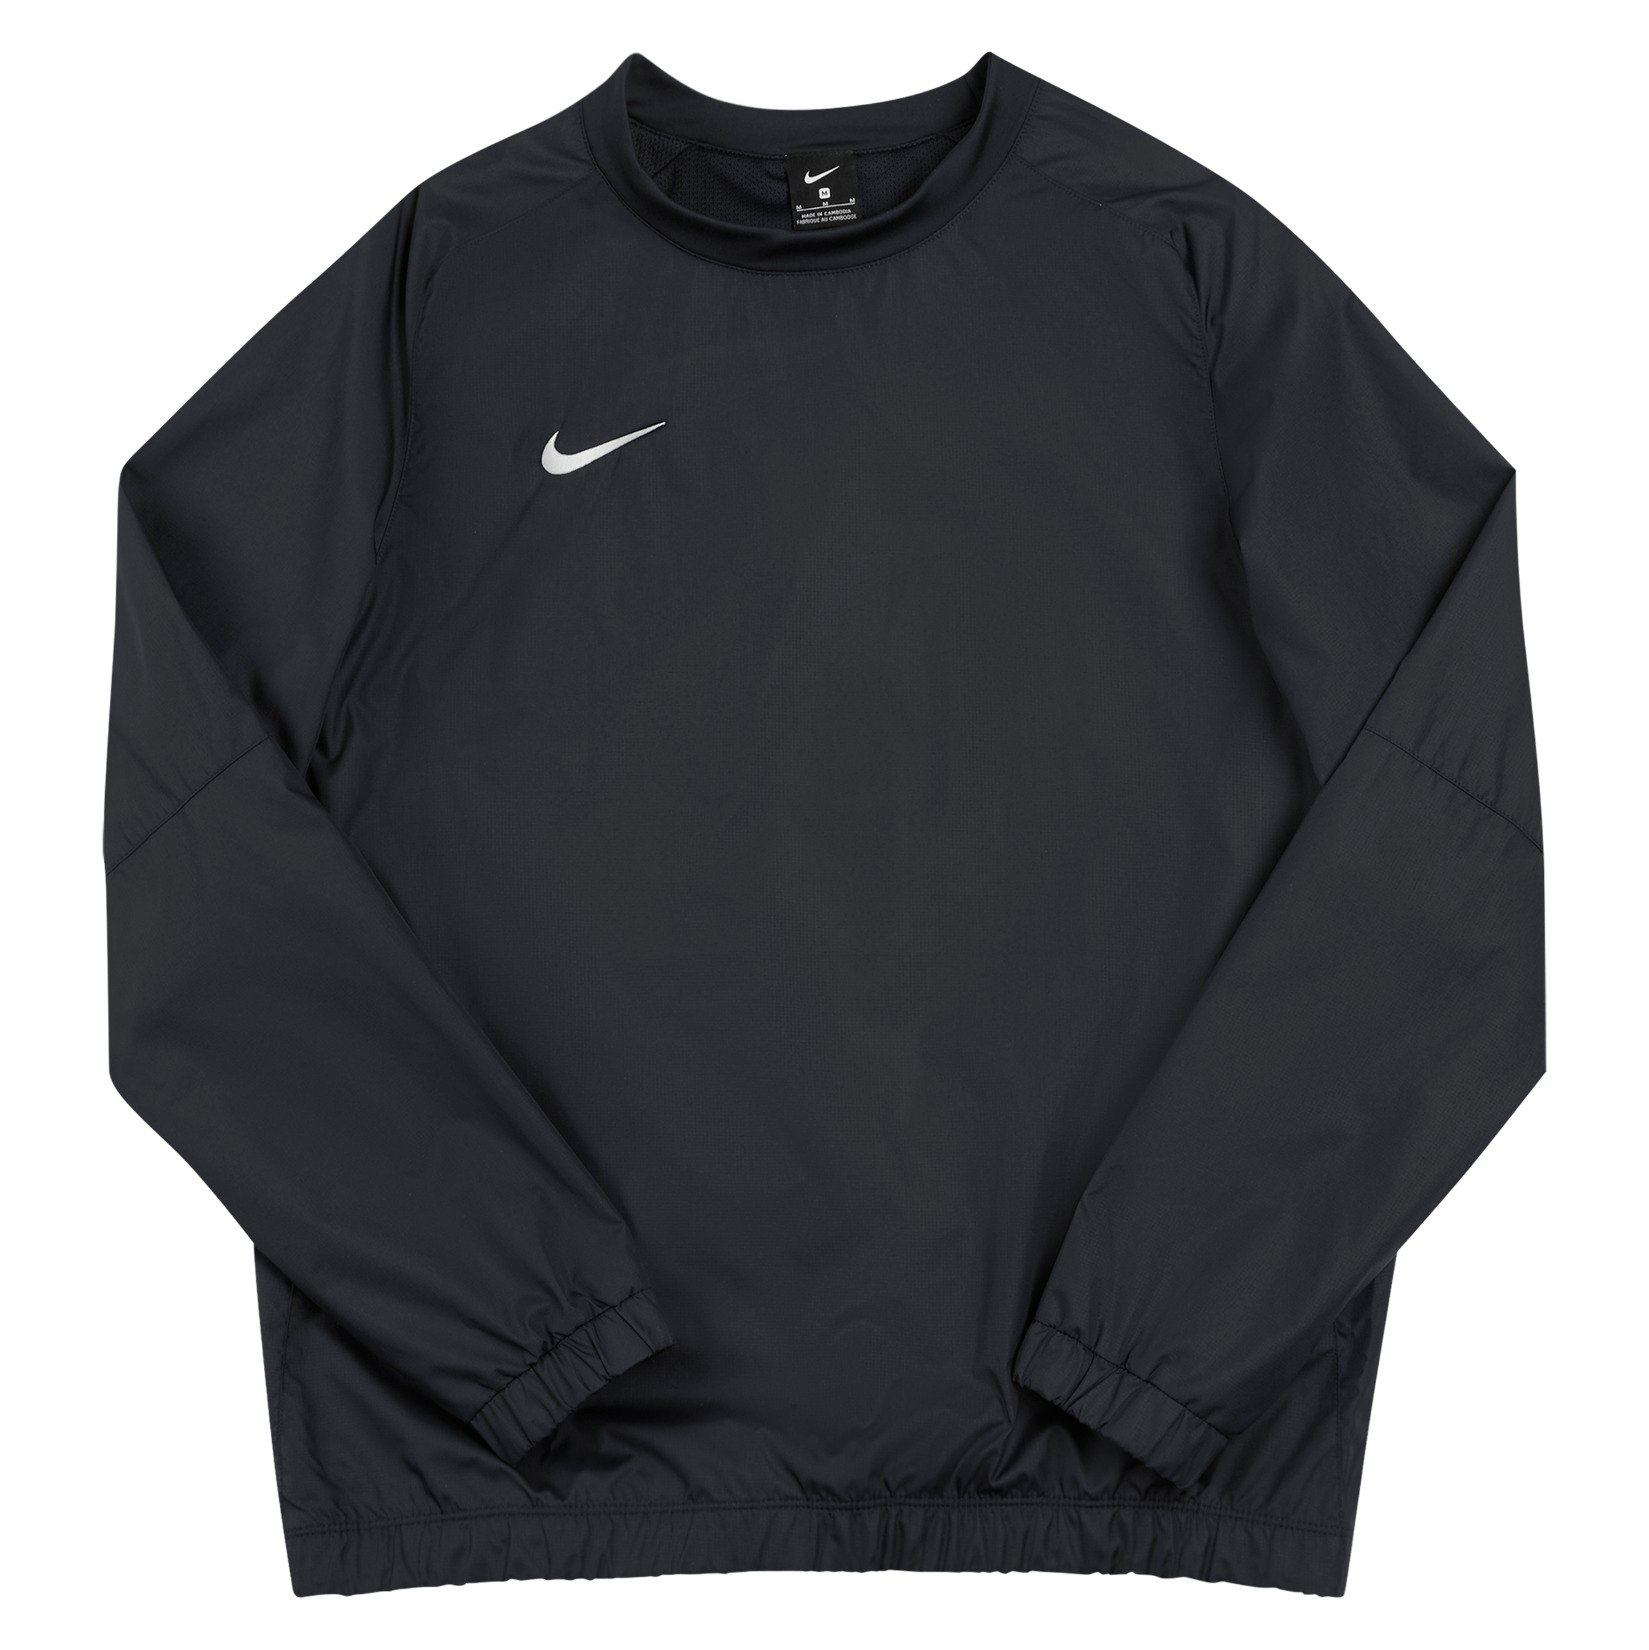 Nike Rugby Contact Drill Top - Kitlocker.com